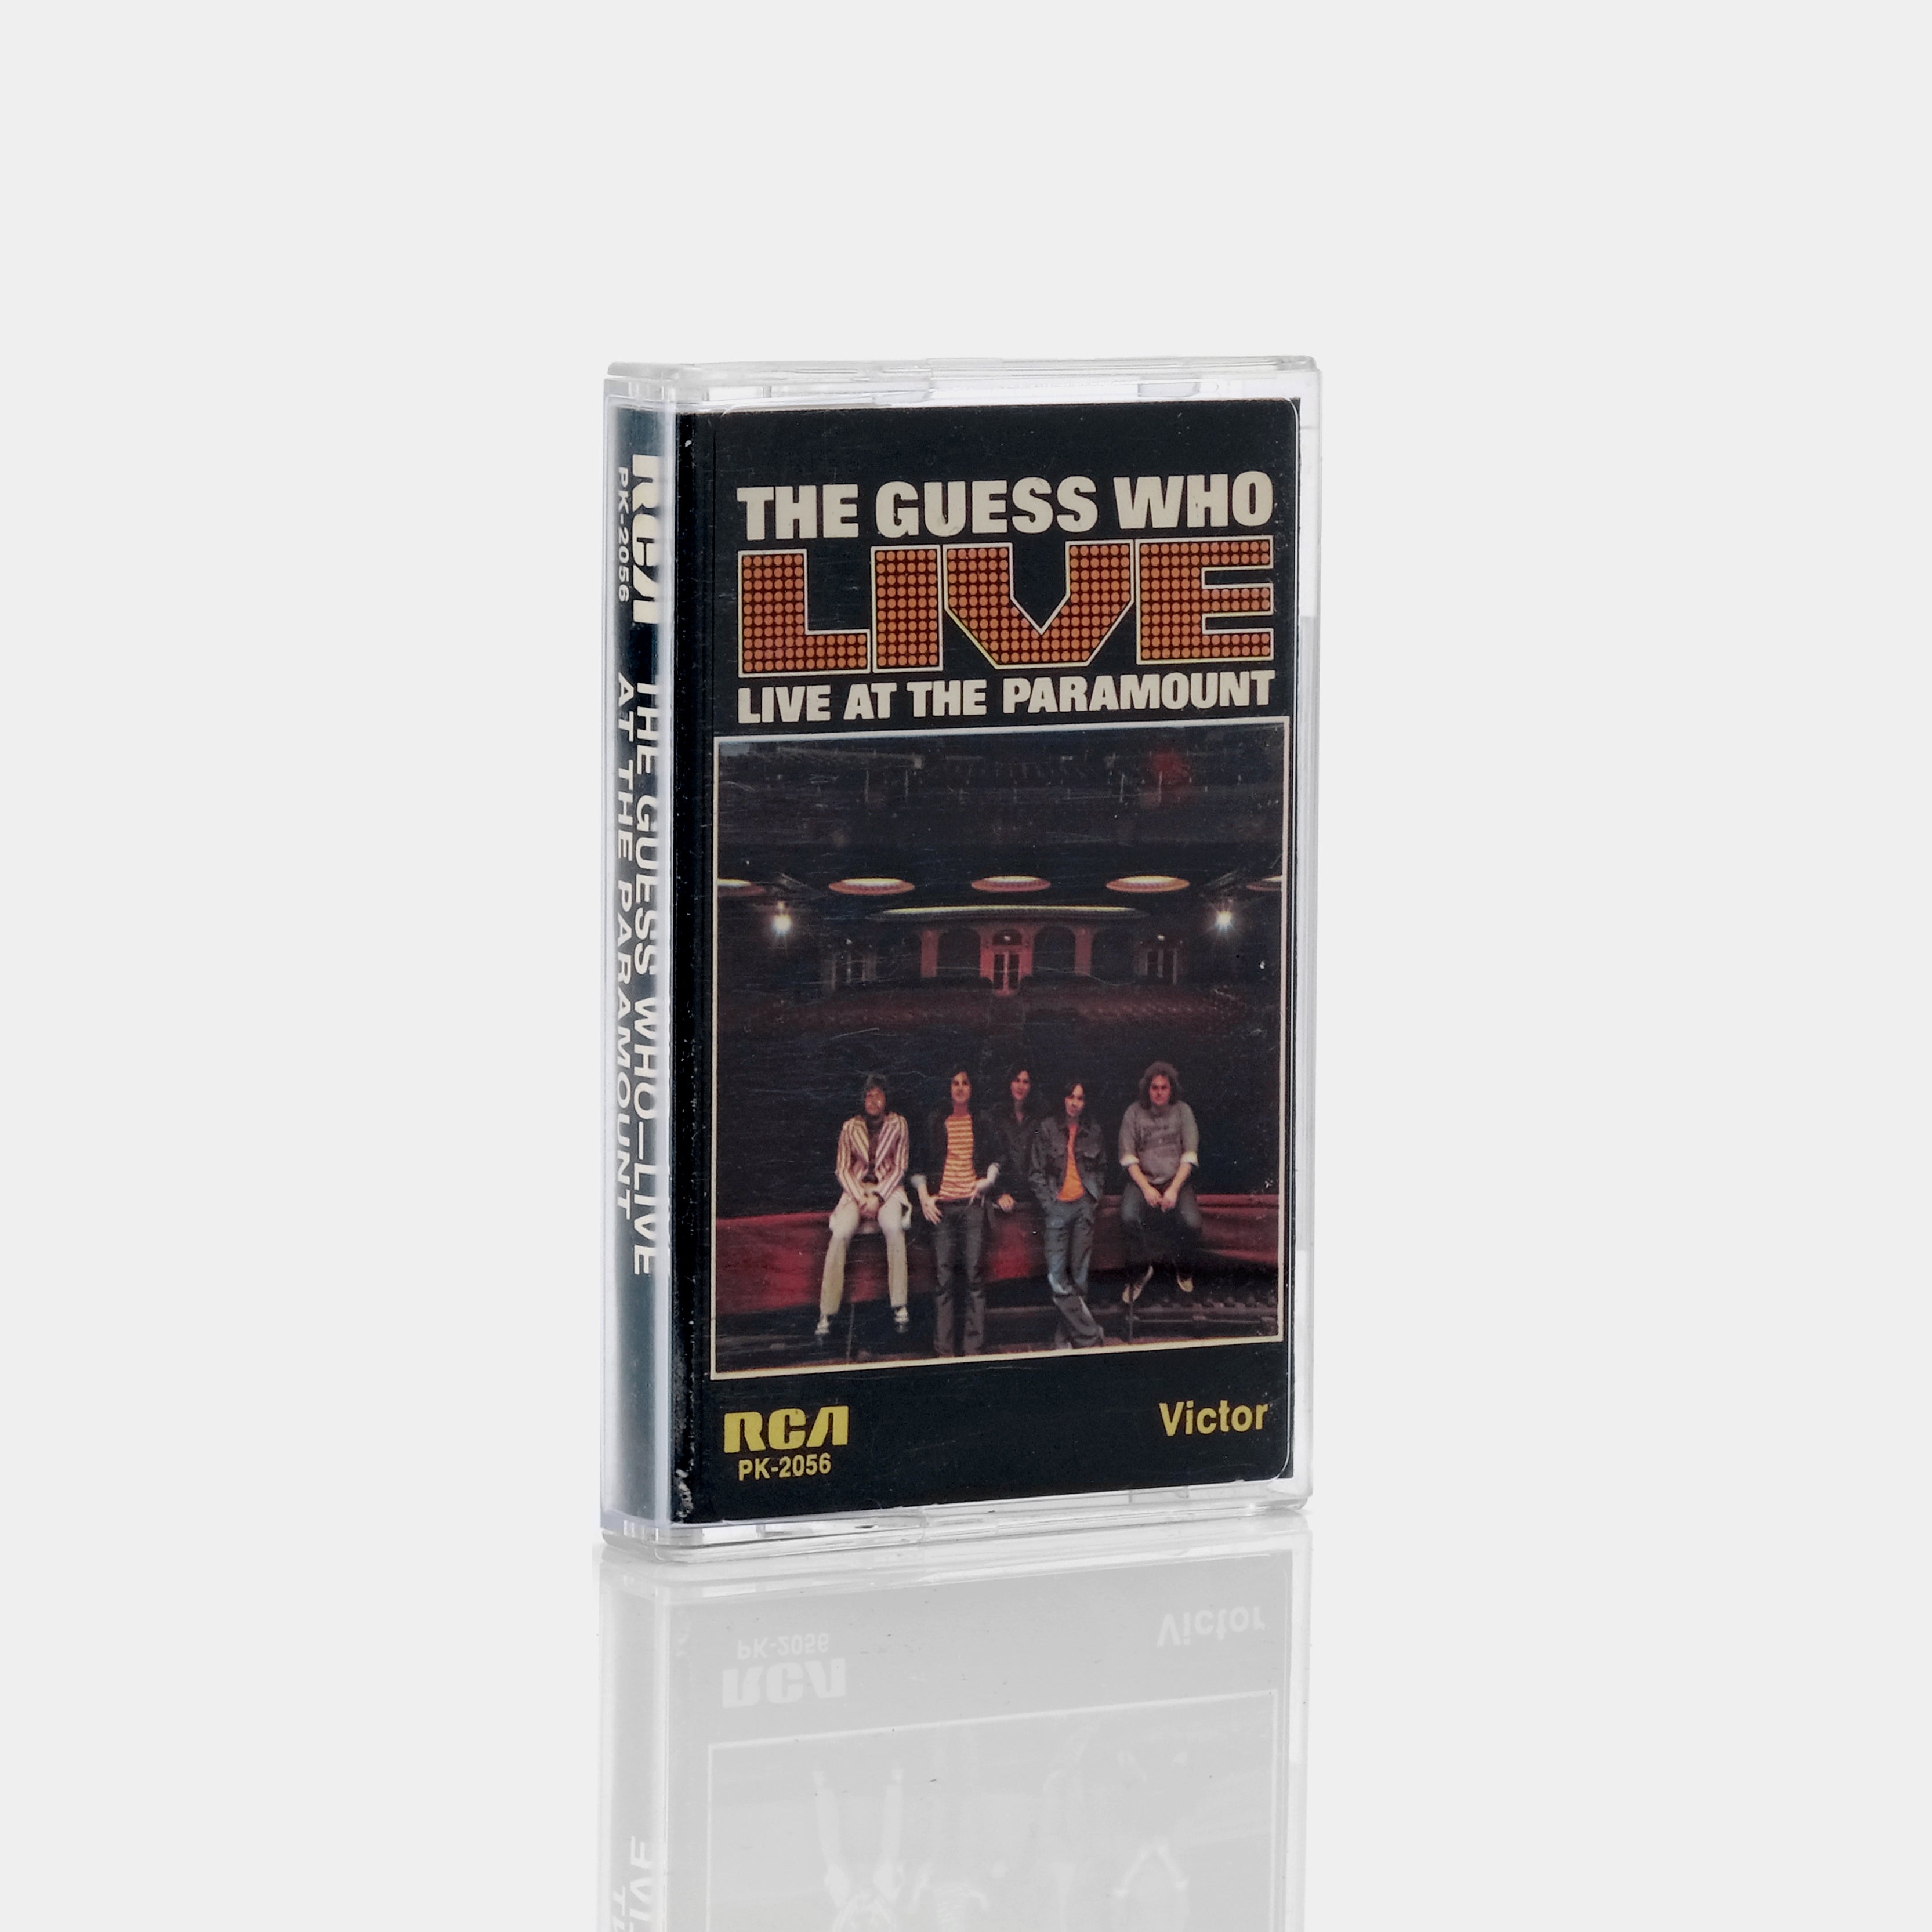 The Guess Who - Live At The Paramount Cassette Tape